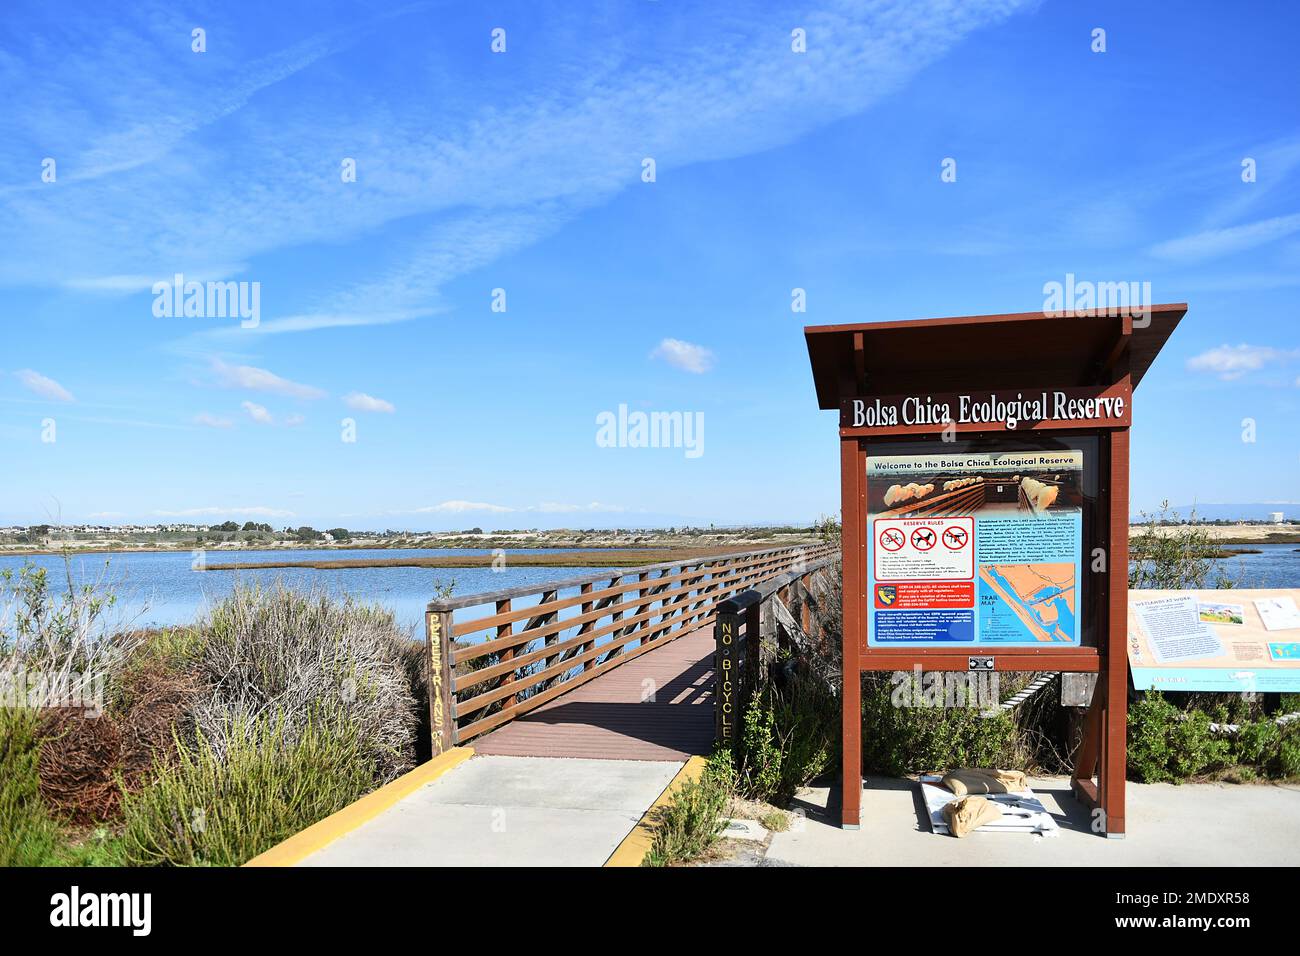 HUNTINGTON BEACH, CALIFORNIA - 18 JAN 2023: Sign and boardwalk at the Bolsa Chica Ecological Reserve, the largest saltwater marsh along the coast of C Stock Photo